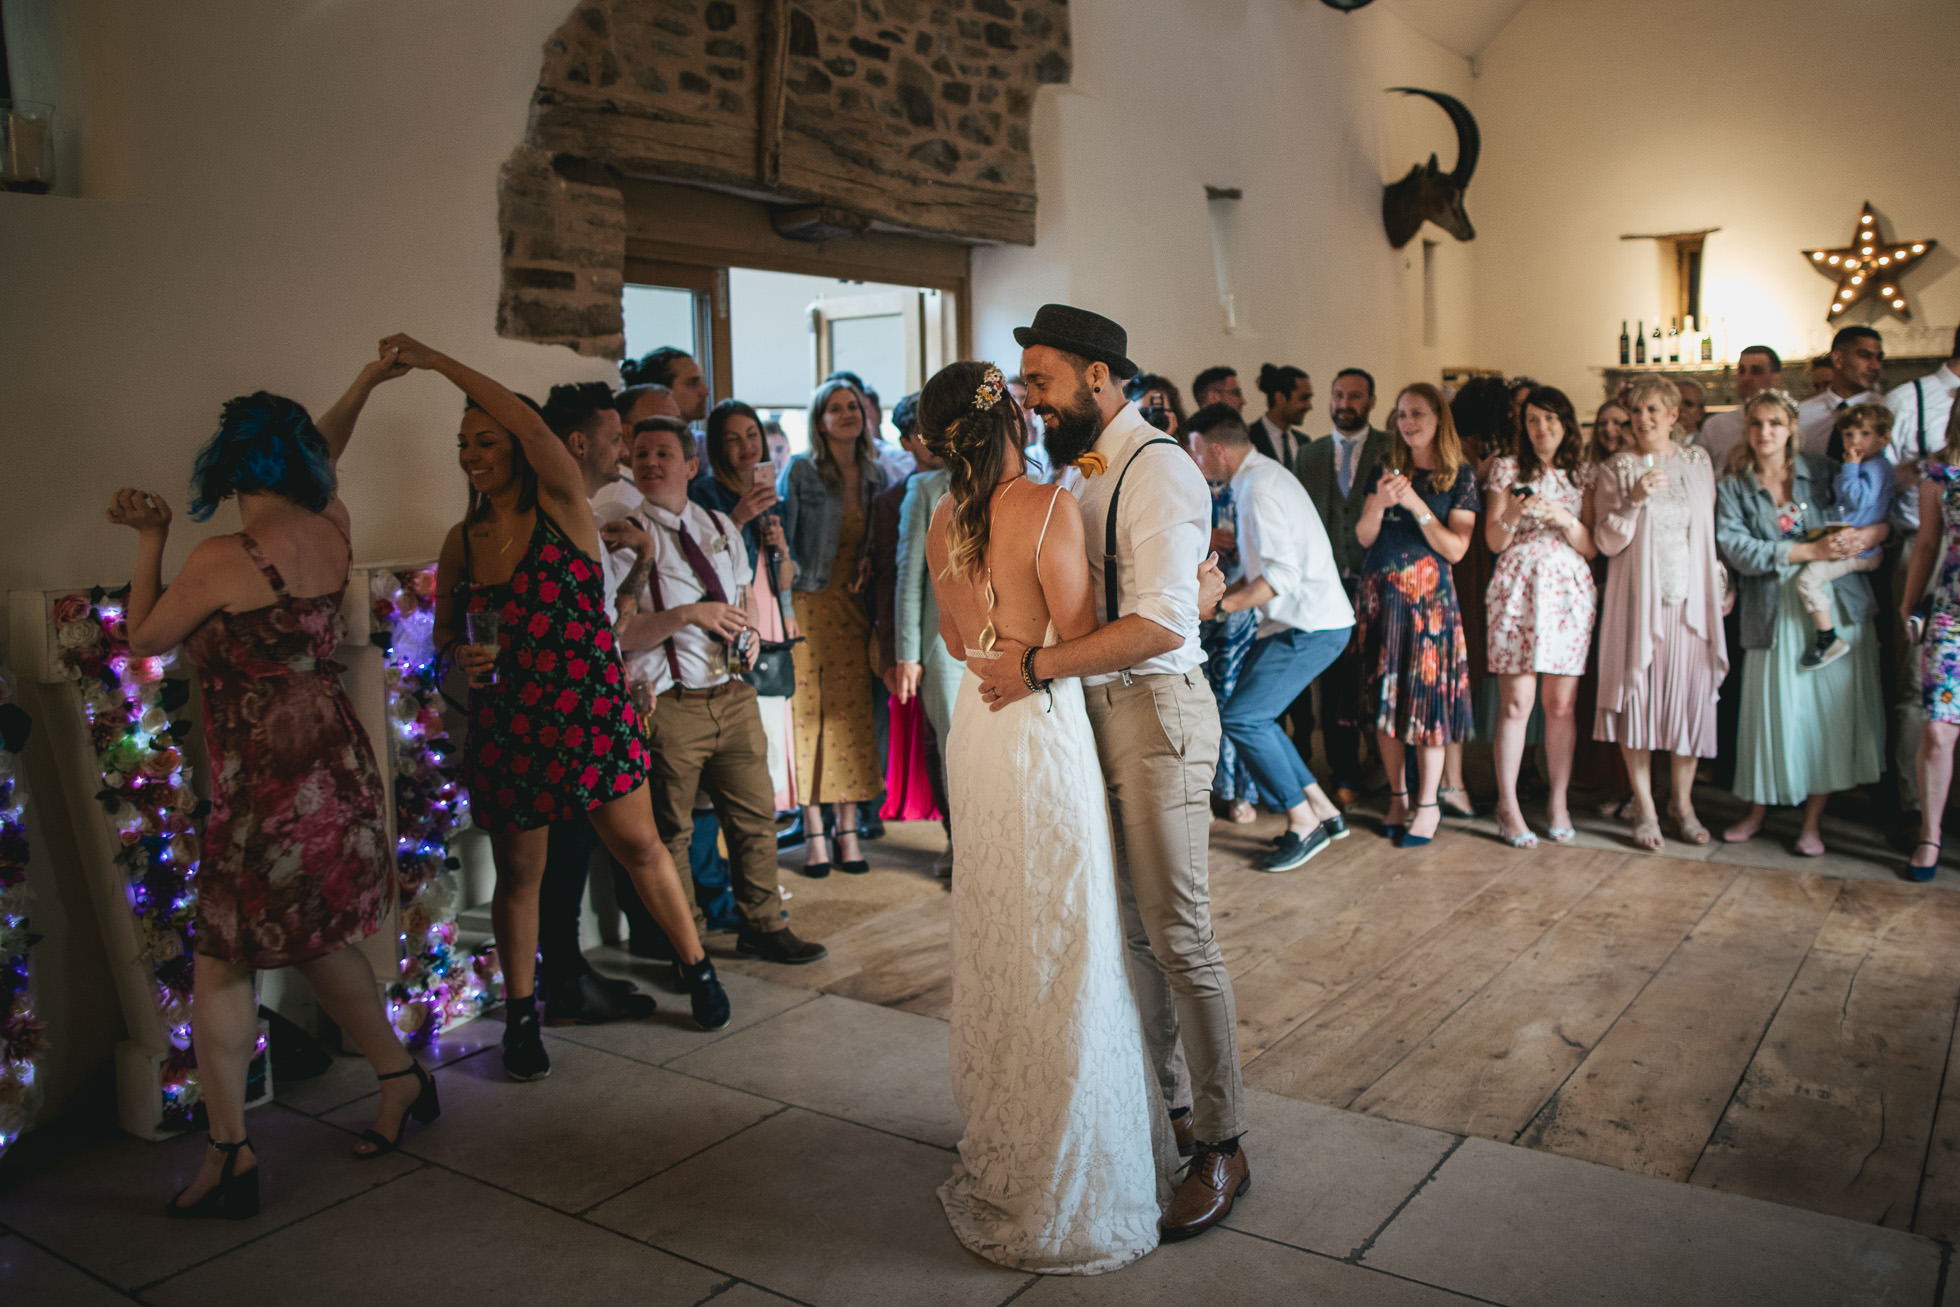 Bride and groom first dance in threshing barn